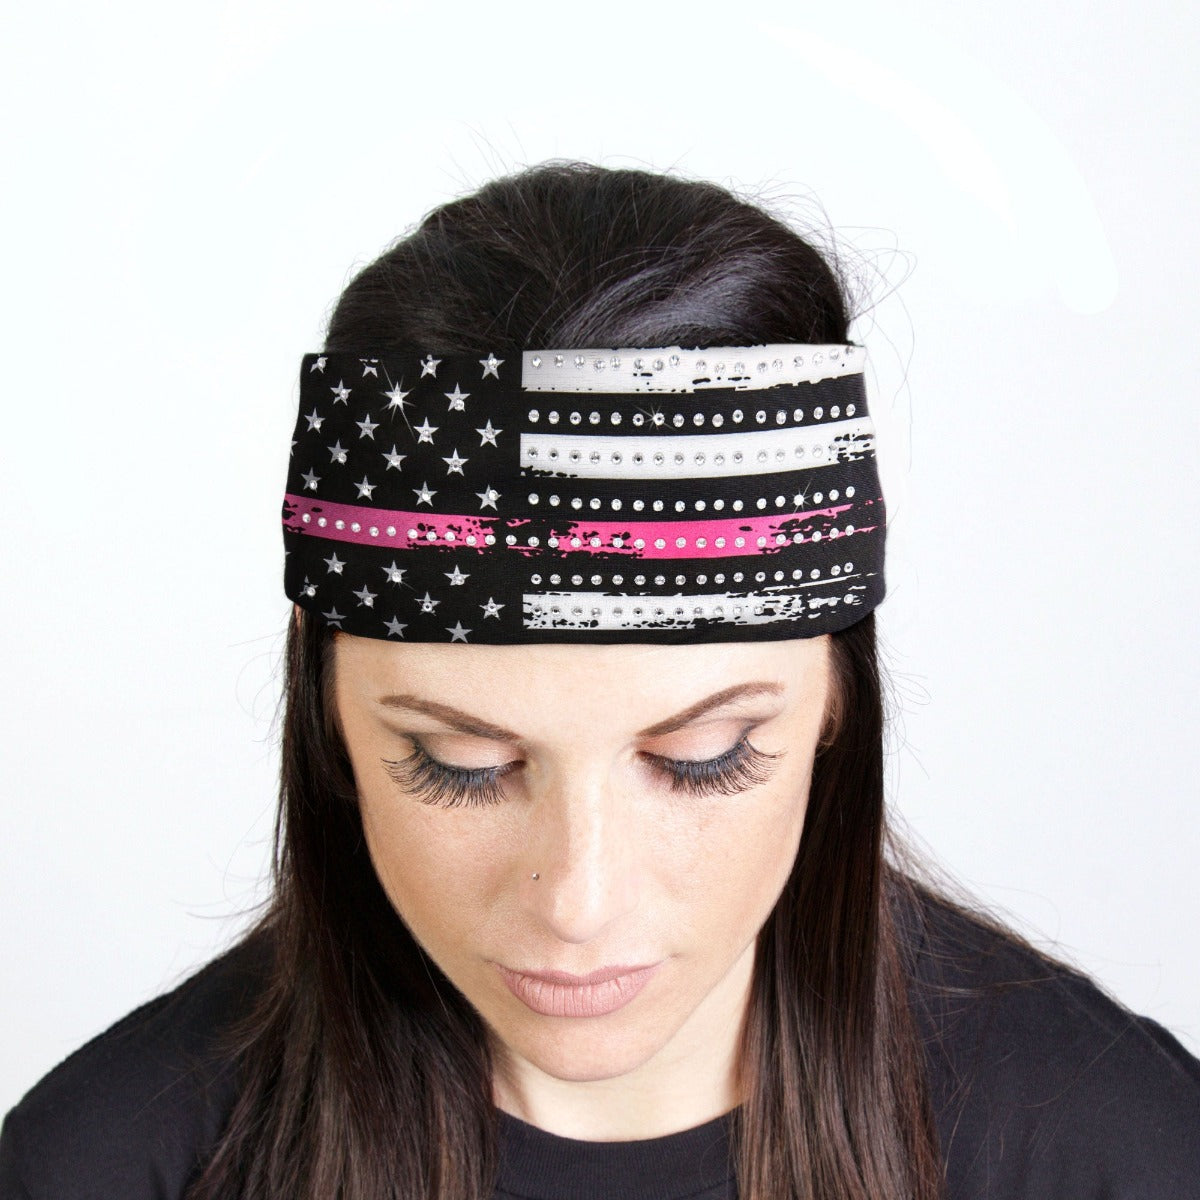 A woman wearing a Hot Leathers Pink Flag Bandana Headband Wrap with Rhinestones adorned with sparkling rhinestone crystals.